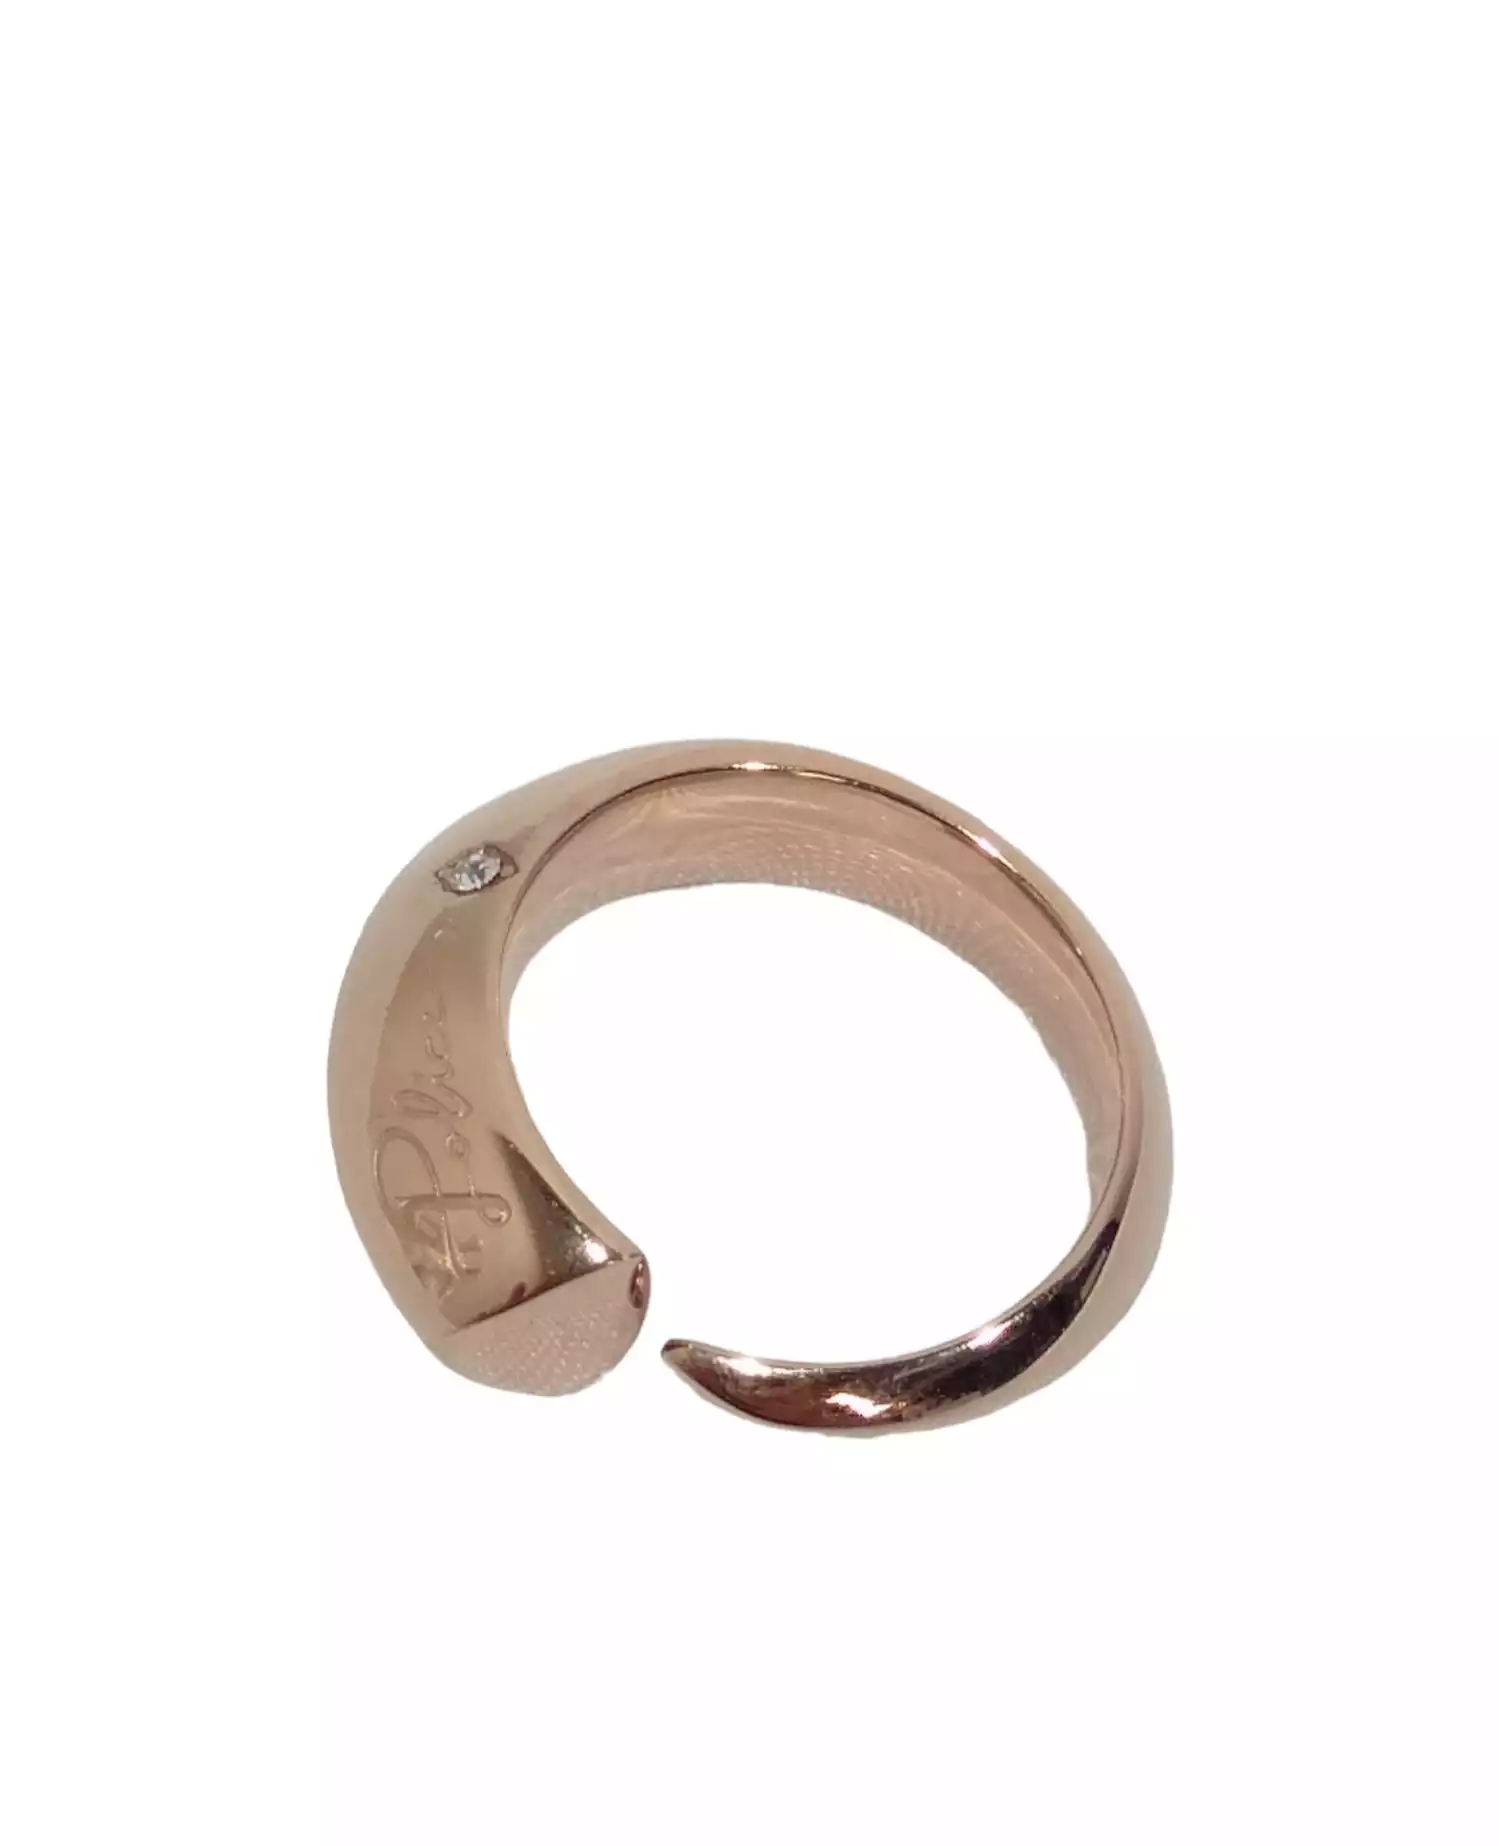 Ring by Police